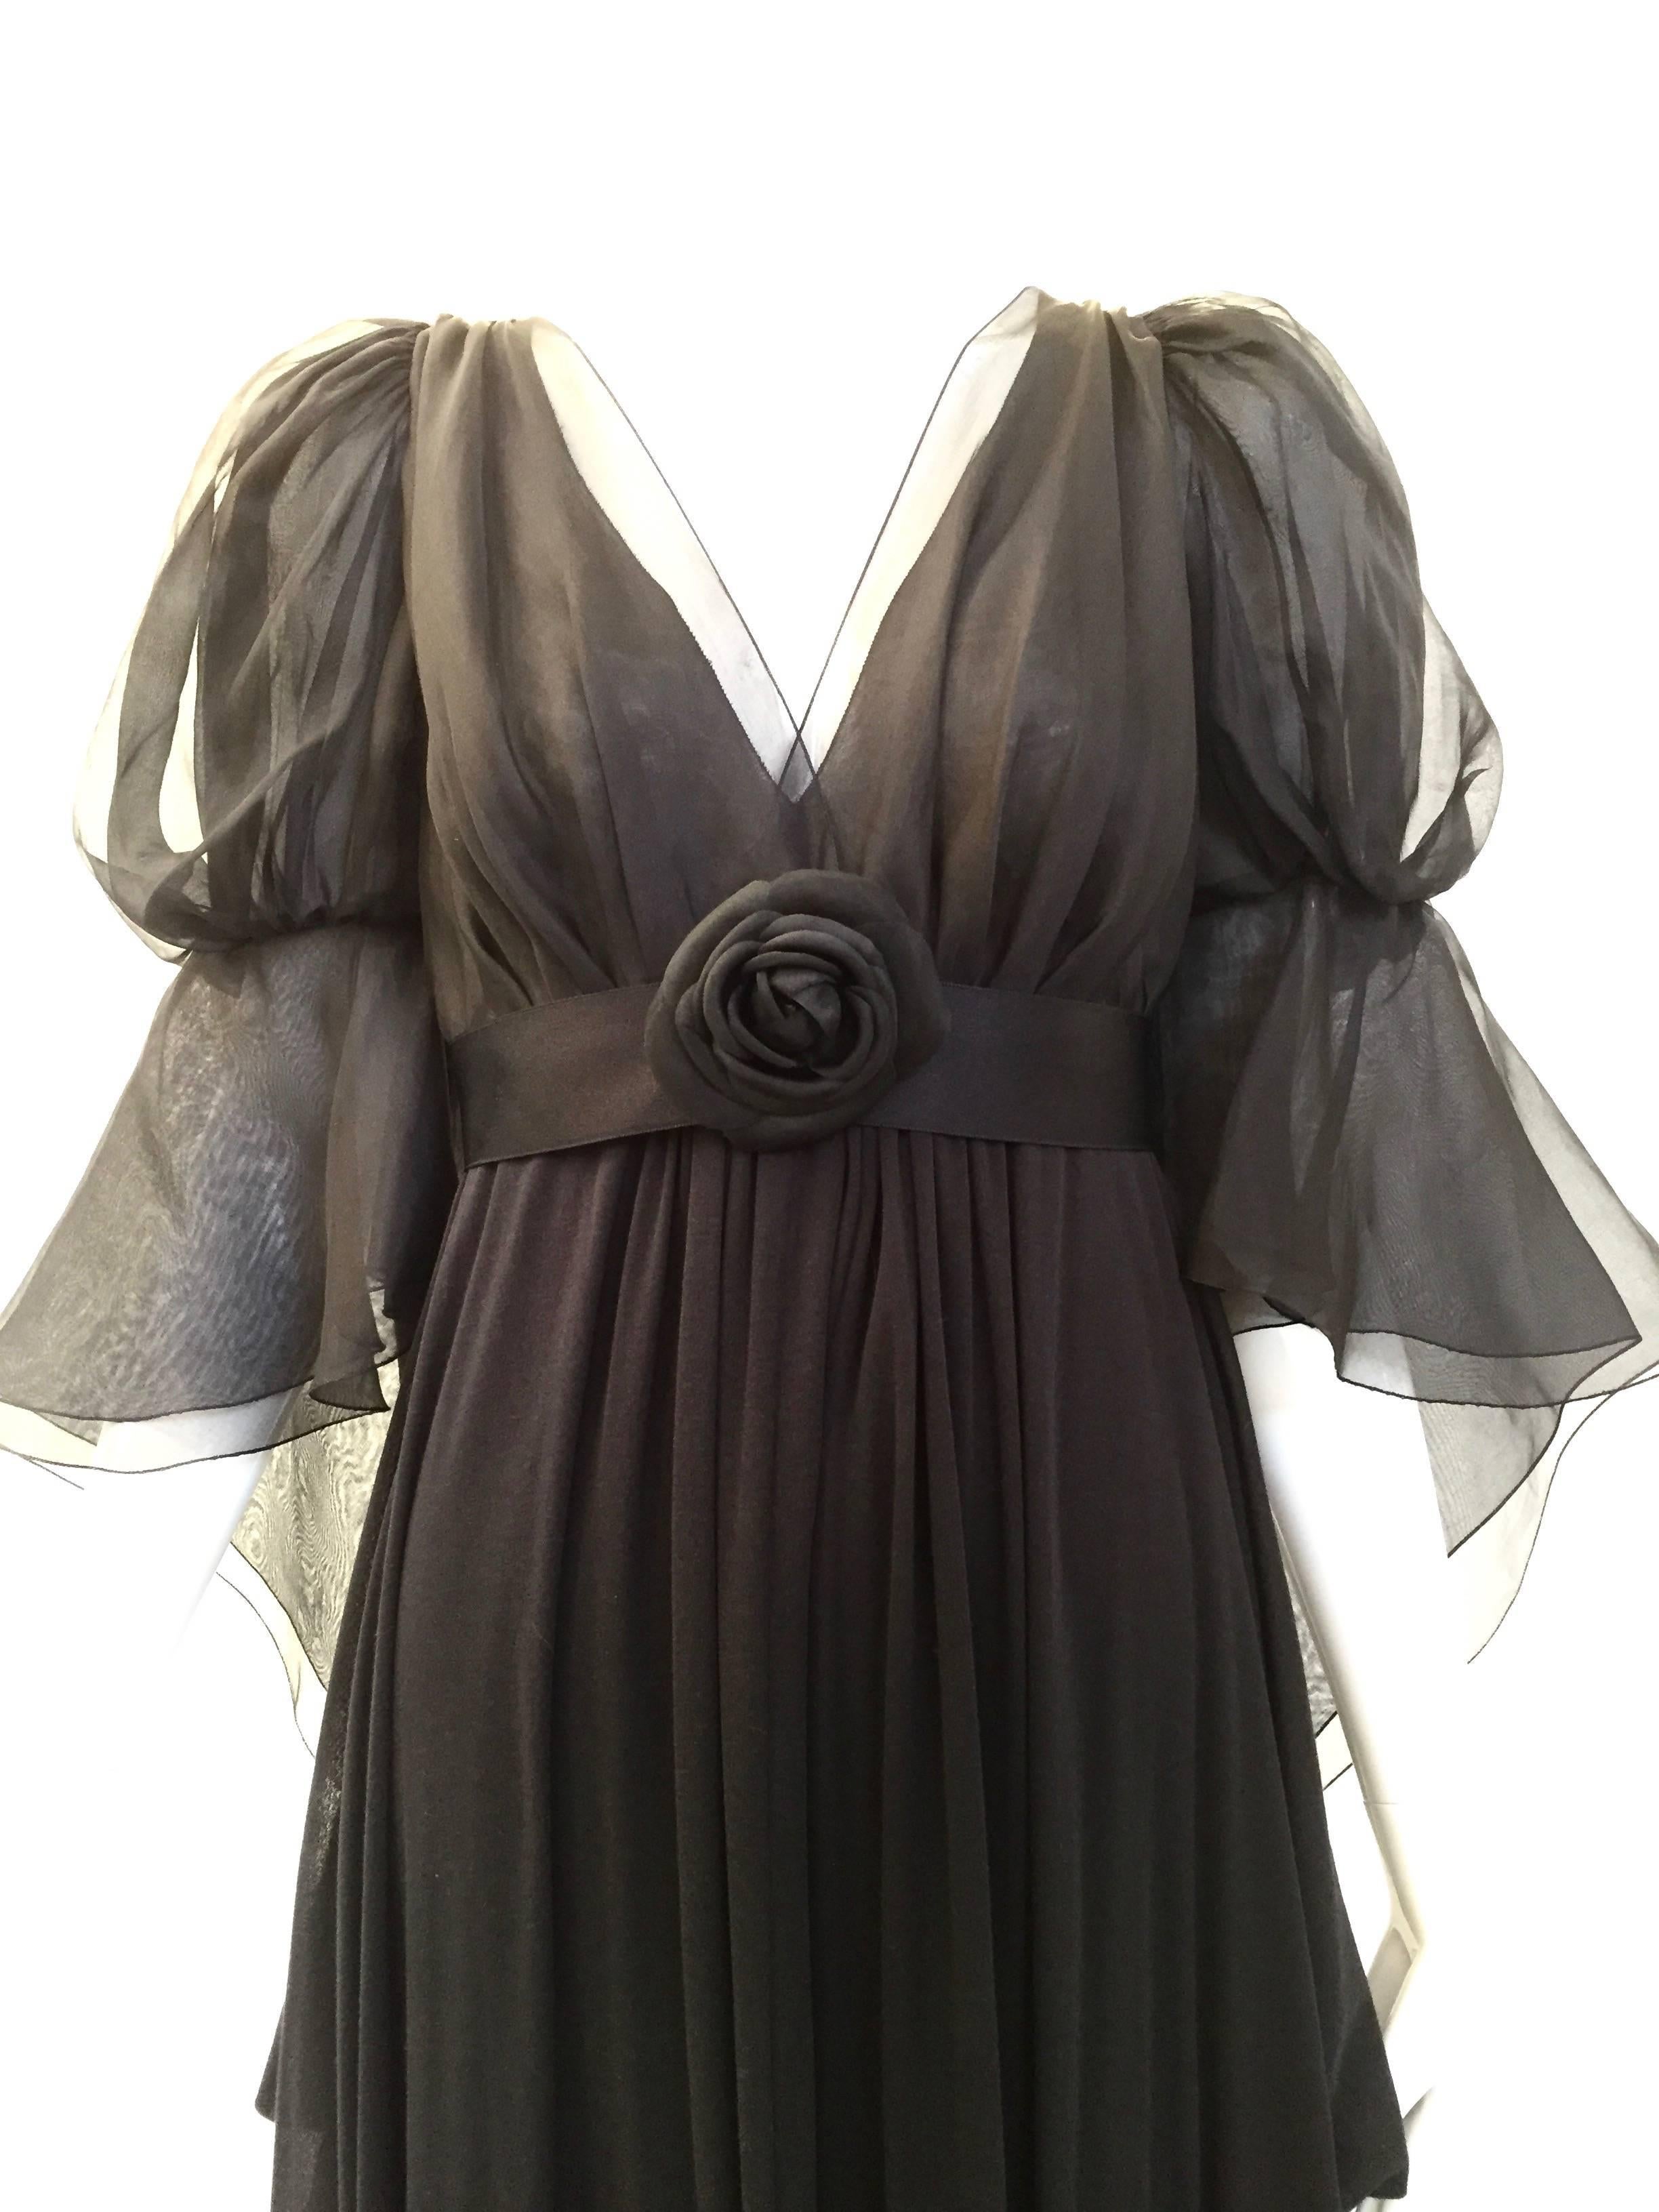 Chanel gown. empire waist.Fabric : silk chiffon and jersey
size : 40
Excellent condition with tag attached. Original price tag was $7335